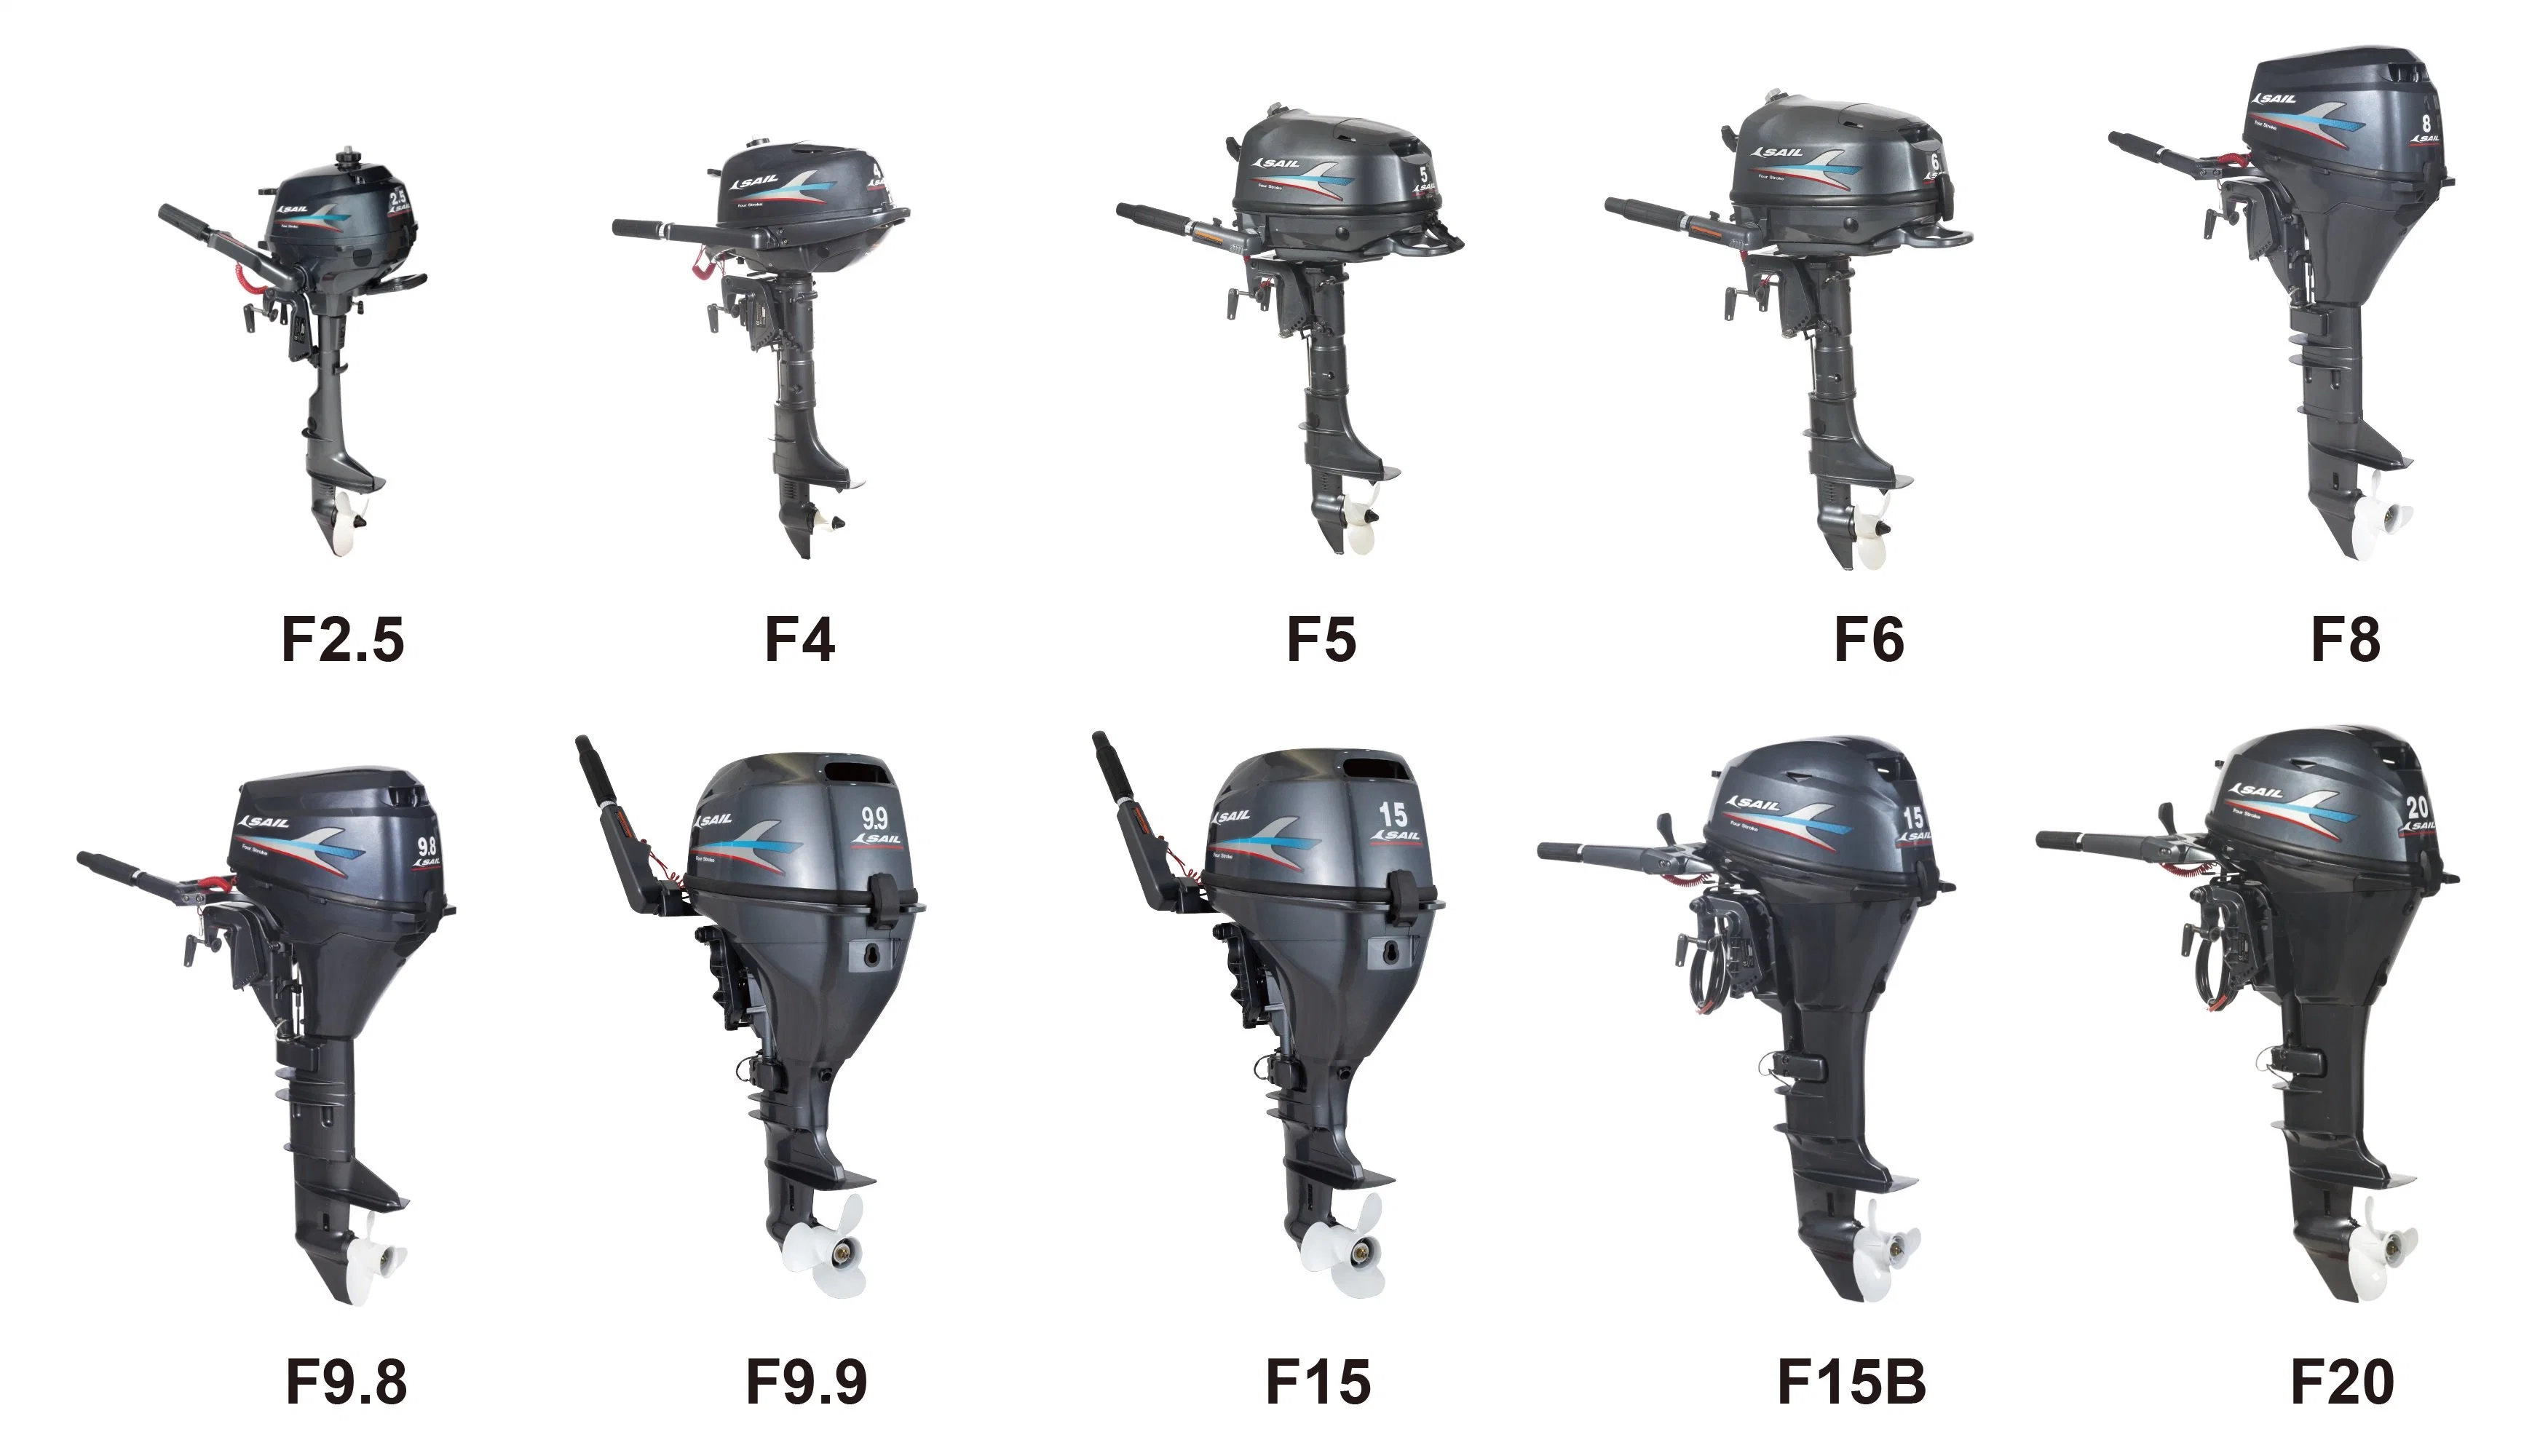 Sail 4 Stroke 2.5HP/4HP/5HP/6HP/8HP/9.9HP/15HP/20HP/25HP/30HP/40HP/50HP/60HP Boat Outboard Motor Engine